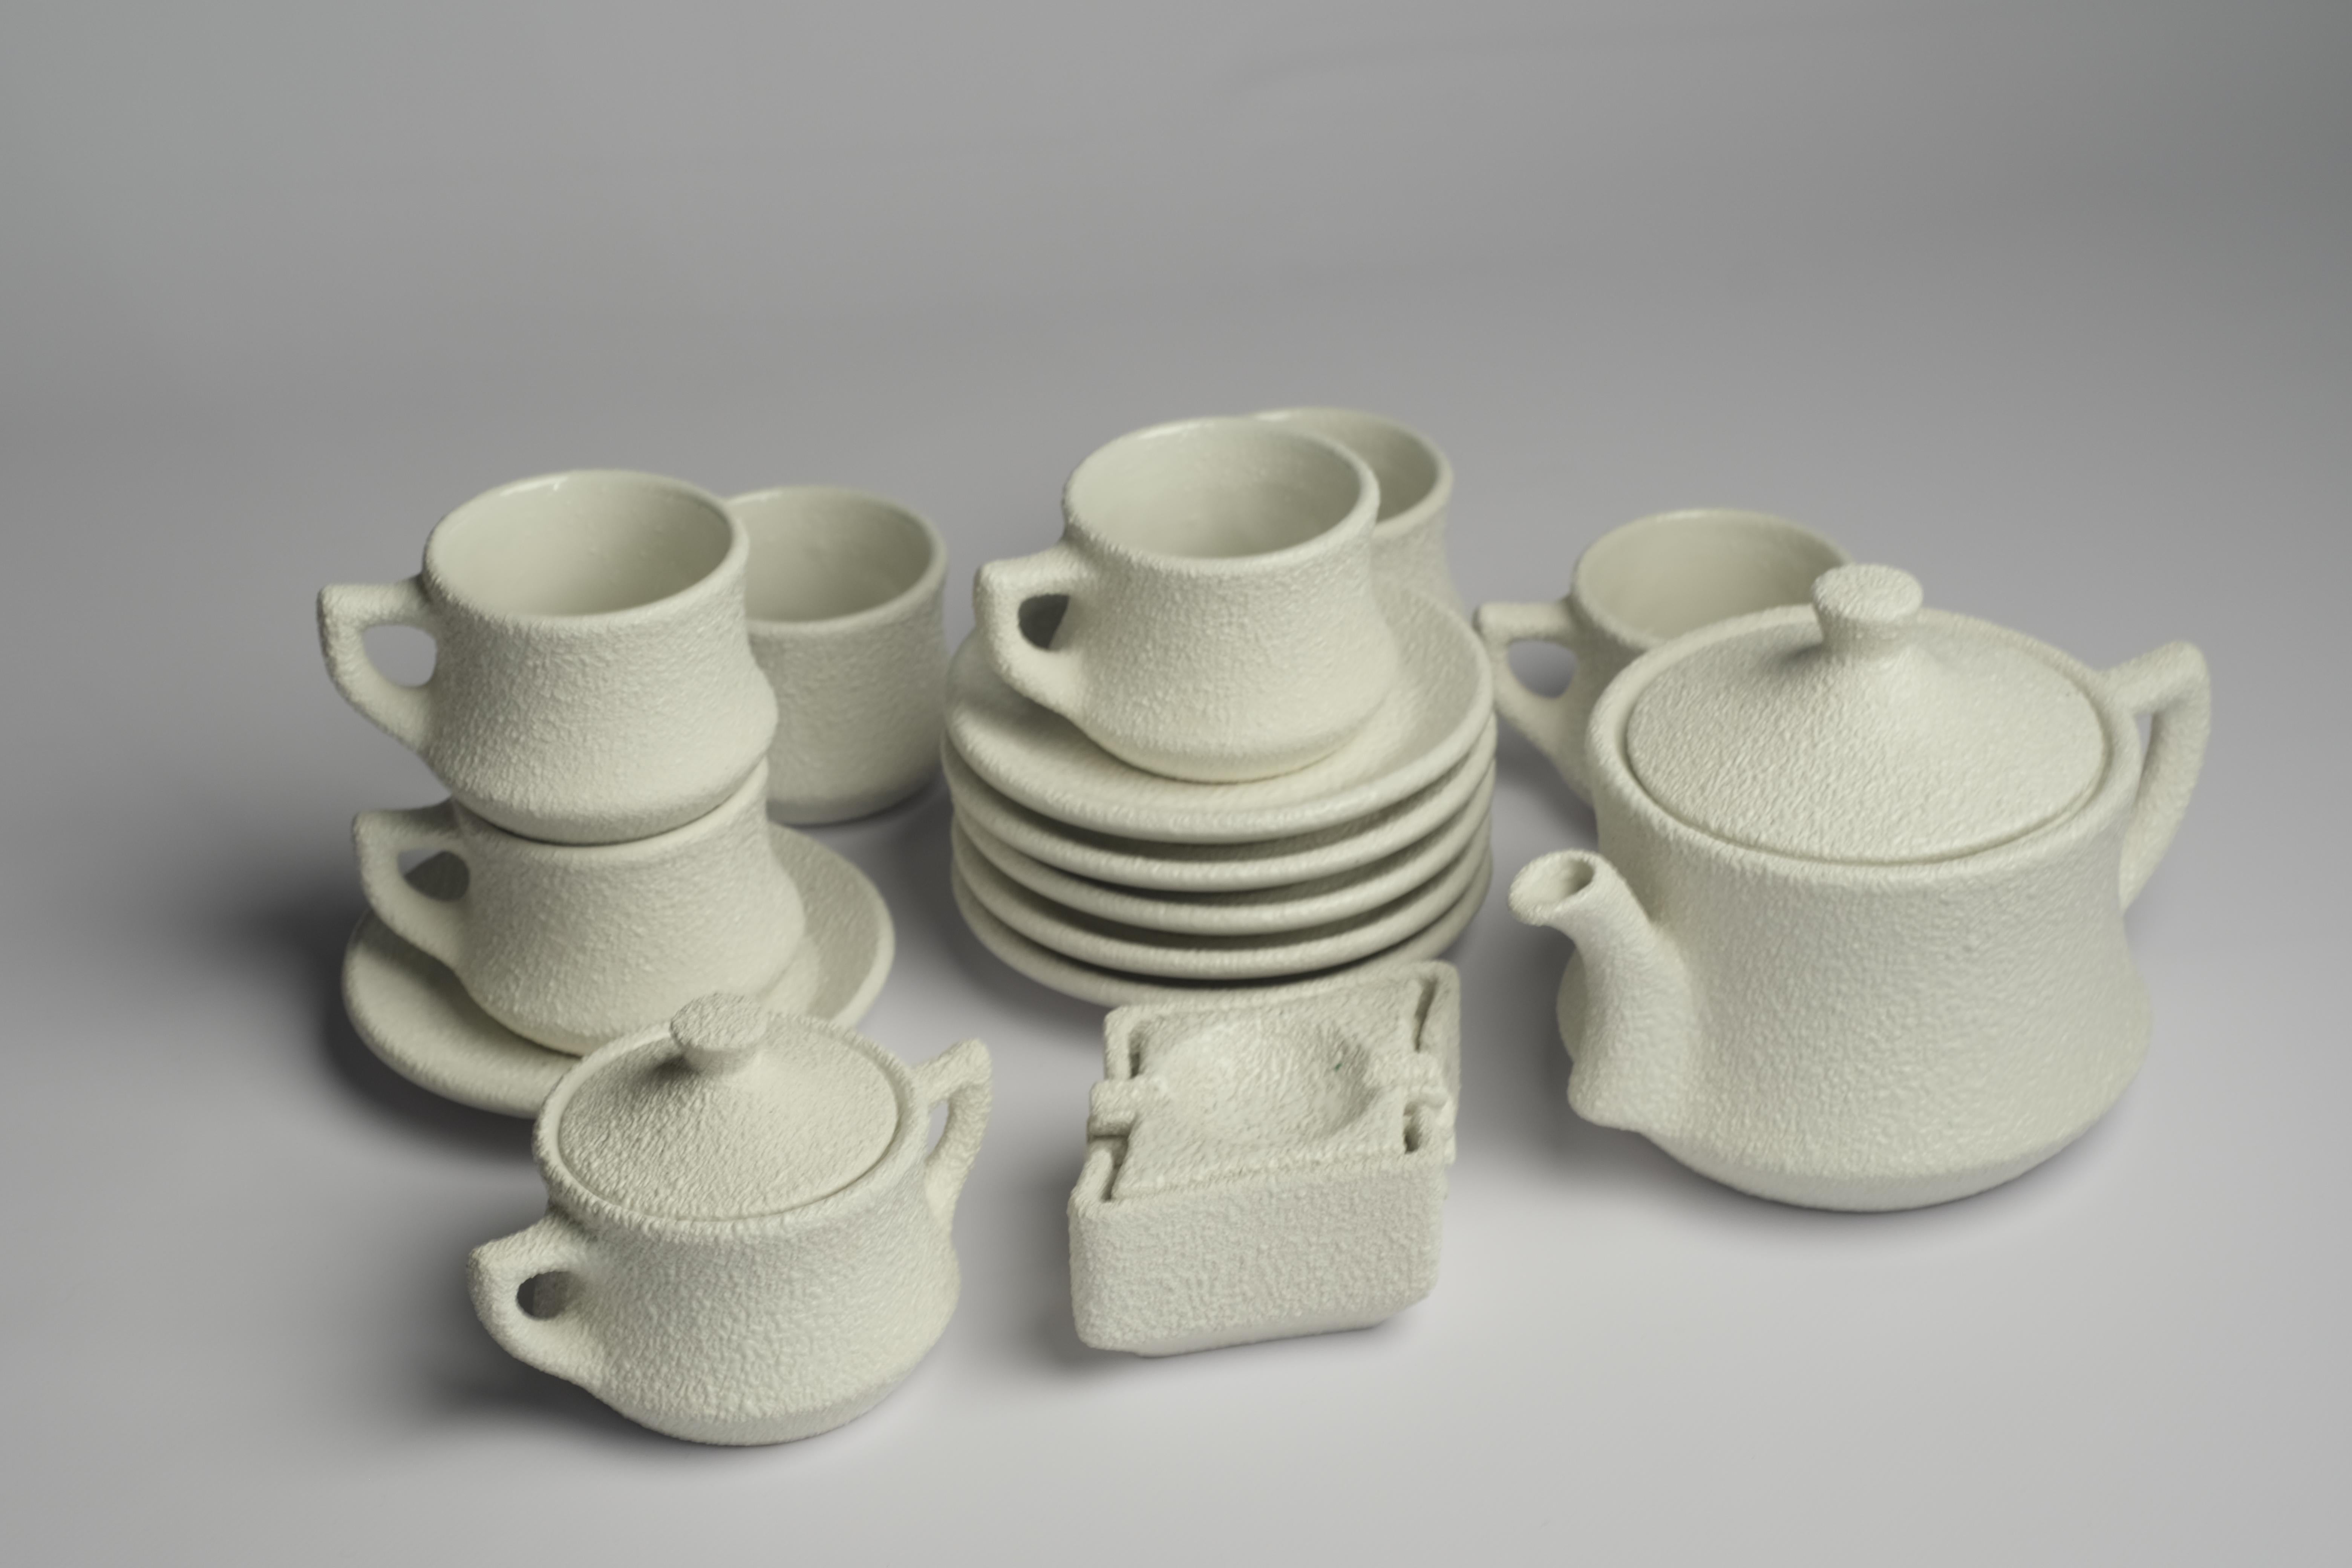 Mid-Century Modern ceramic coffee/tea set glazed in a granulated sand textured stucco finish. The combination of the early 20th century lines and the more modern rugged texture, makes this set rather eye-catching and interesting. 

Set contains of